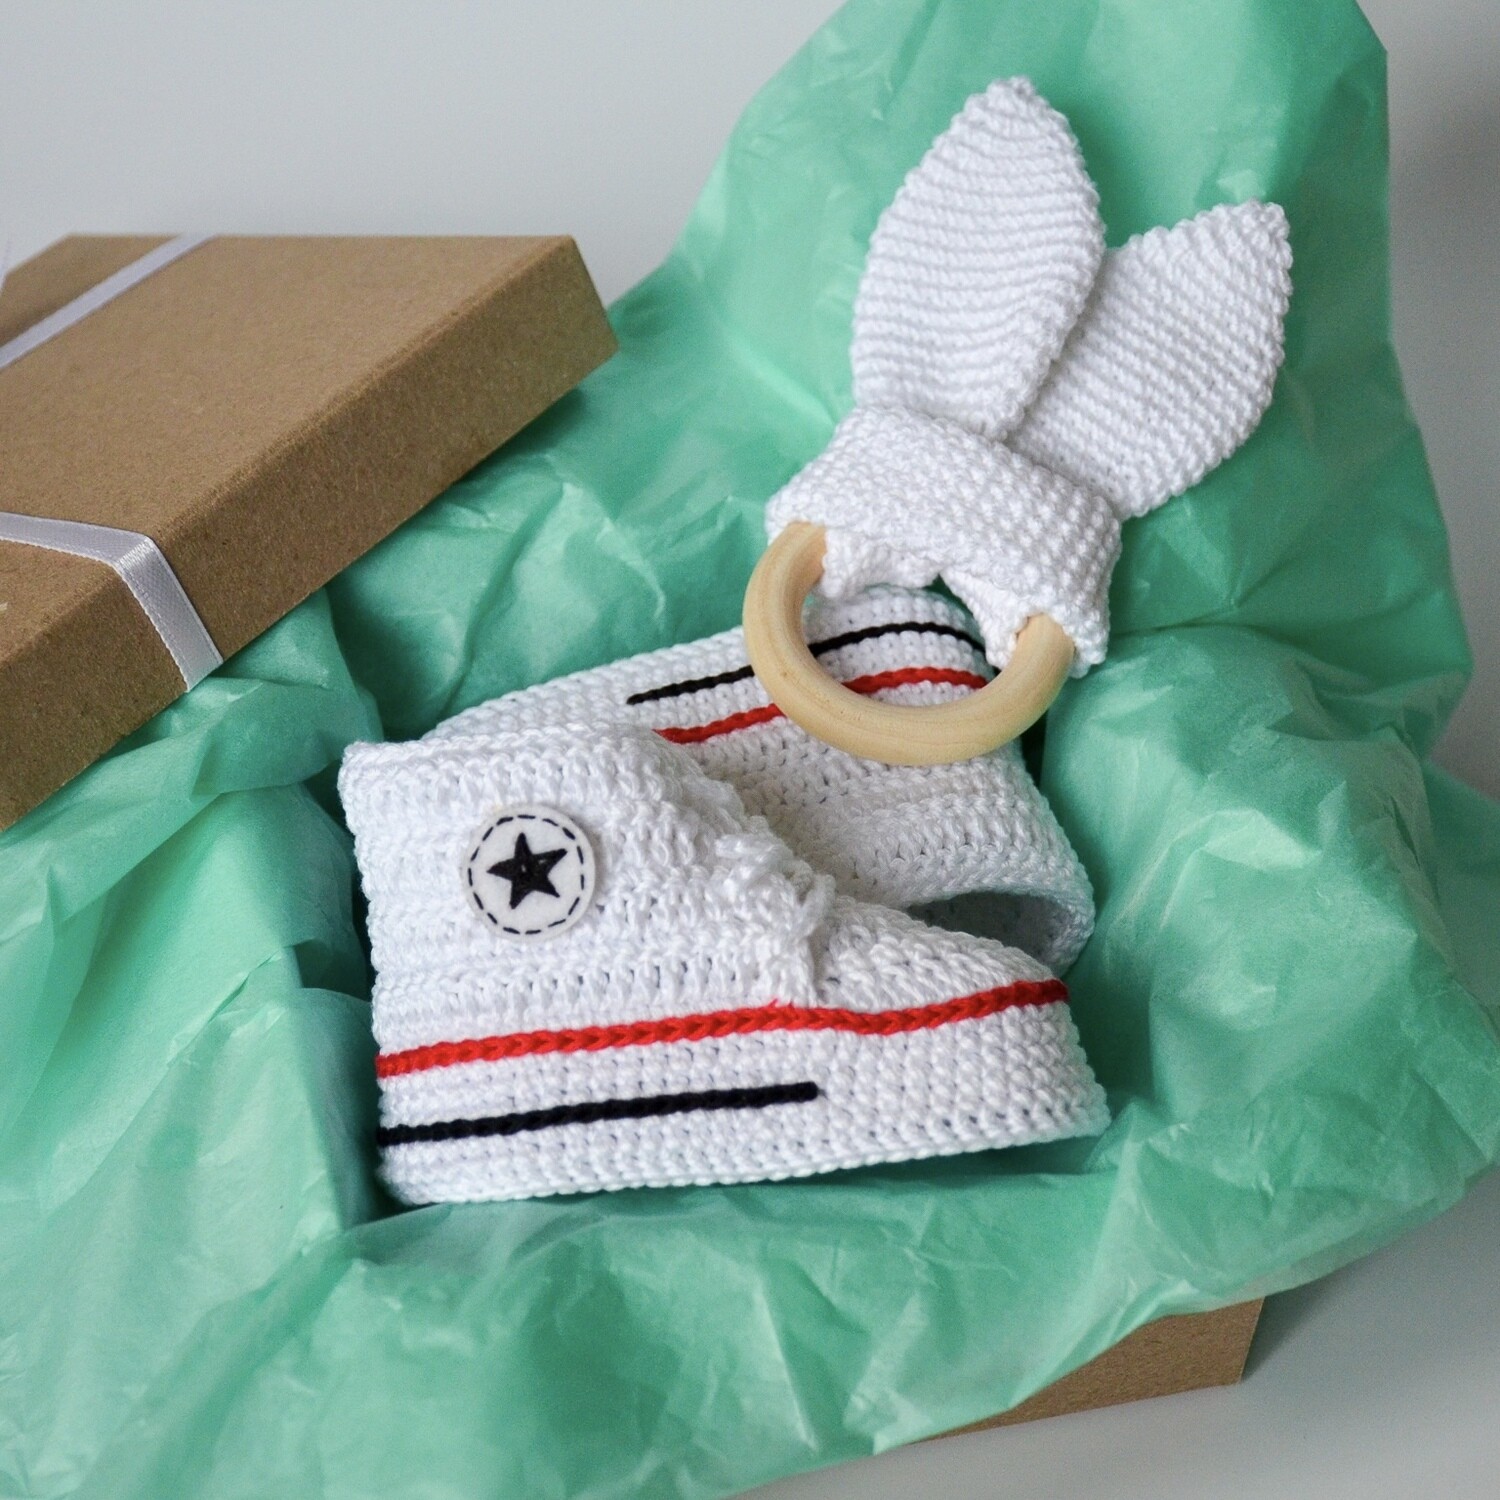 Crochet pattern set: baby shoes & baby teether with bunny ears